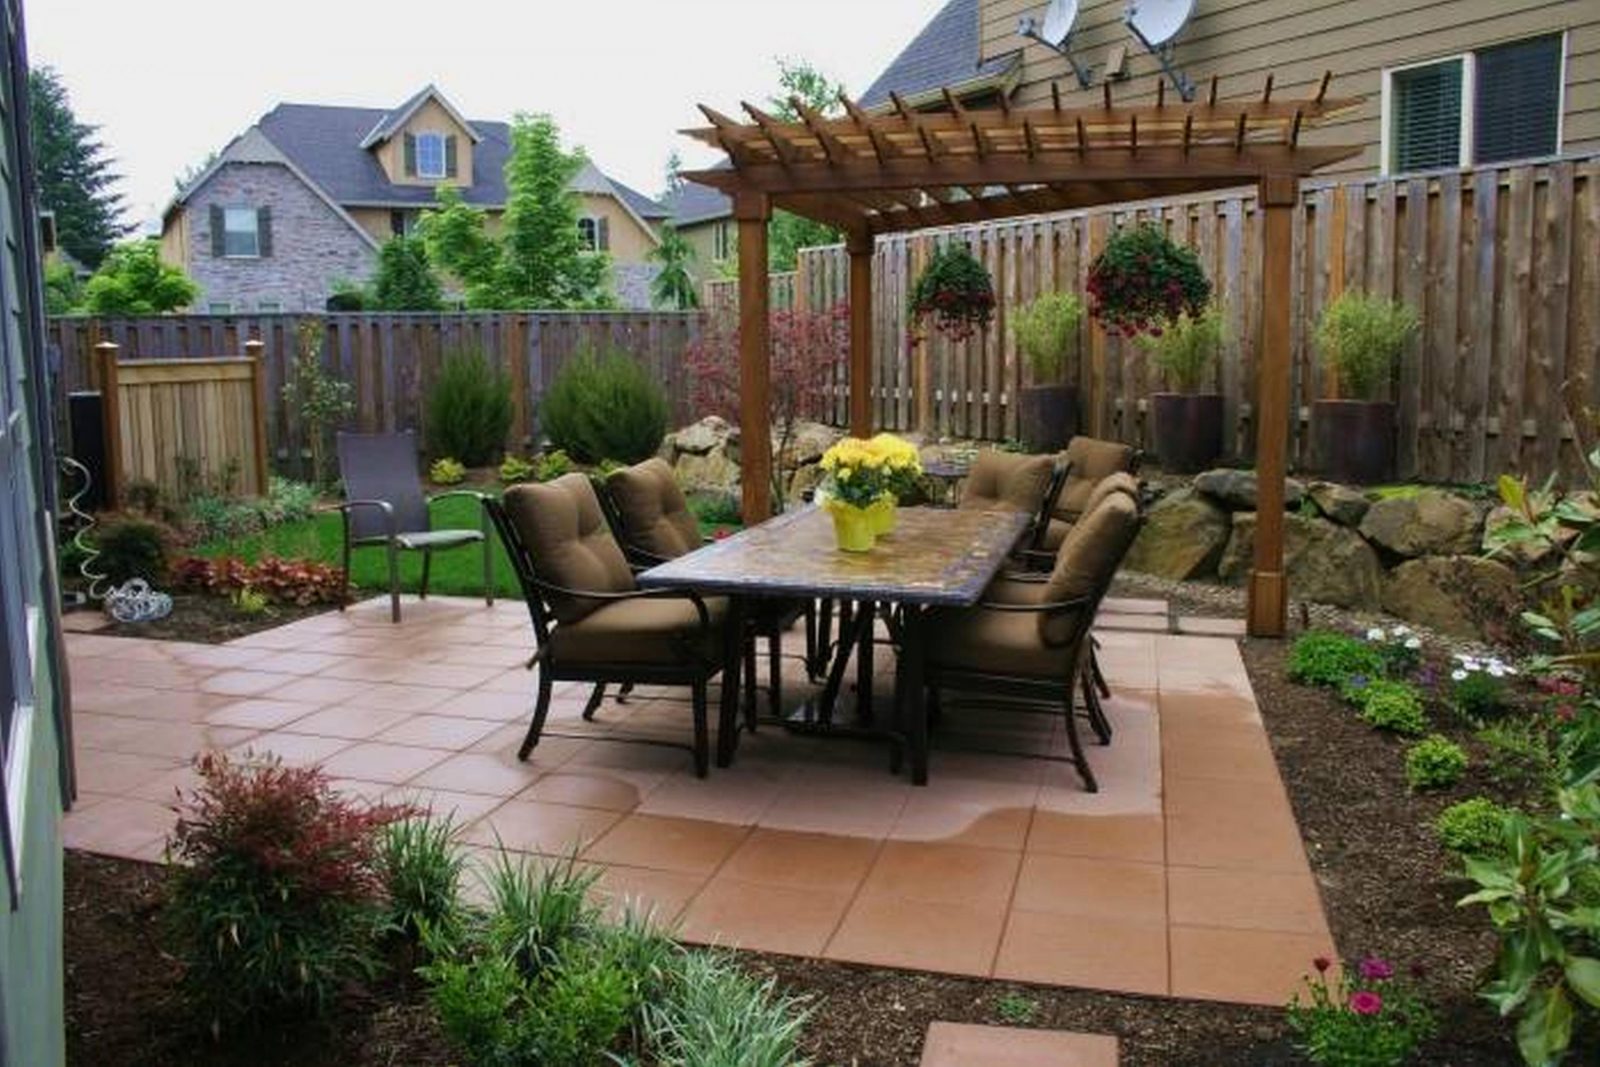 Backyard Patio Ideas for Small Spaces On a Budget : Small Backyard Patio Designs With Fireplace On A Budget